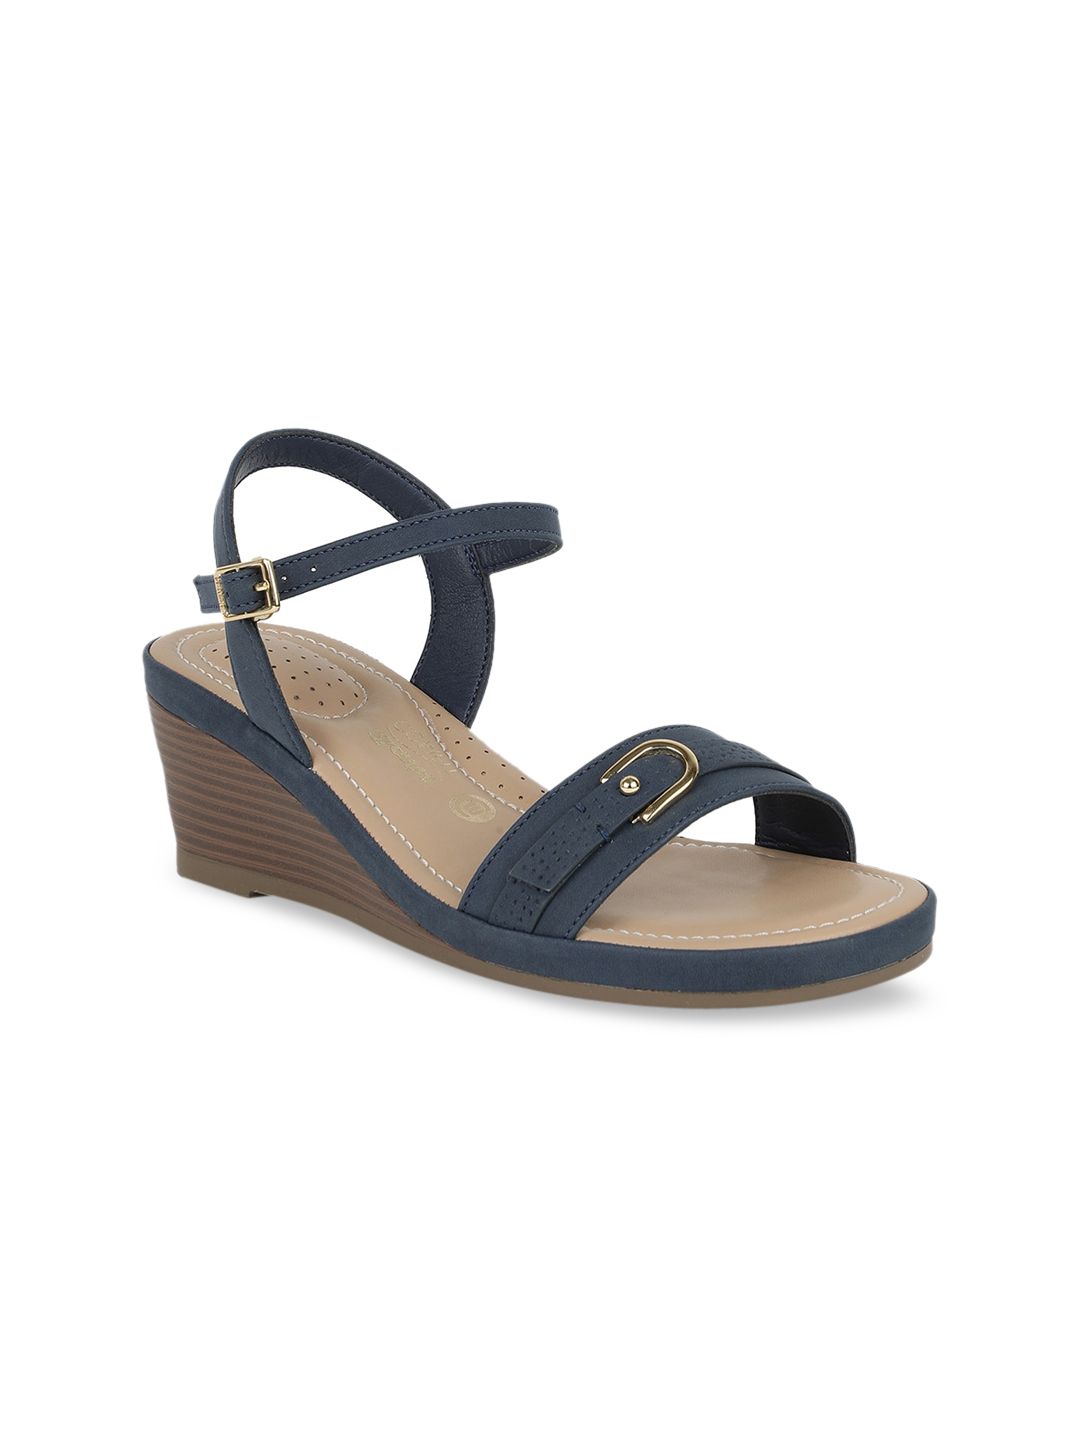 Bata Women Navy Blue Solid Sandals Price in India